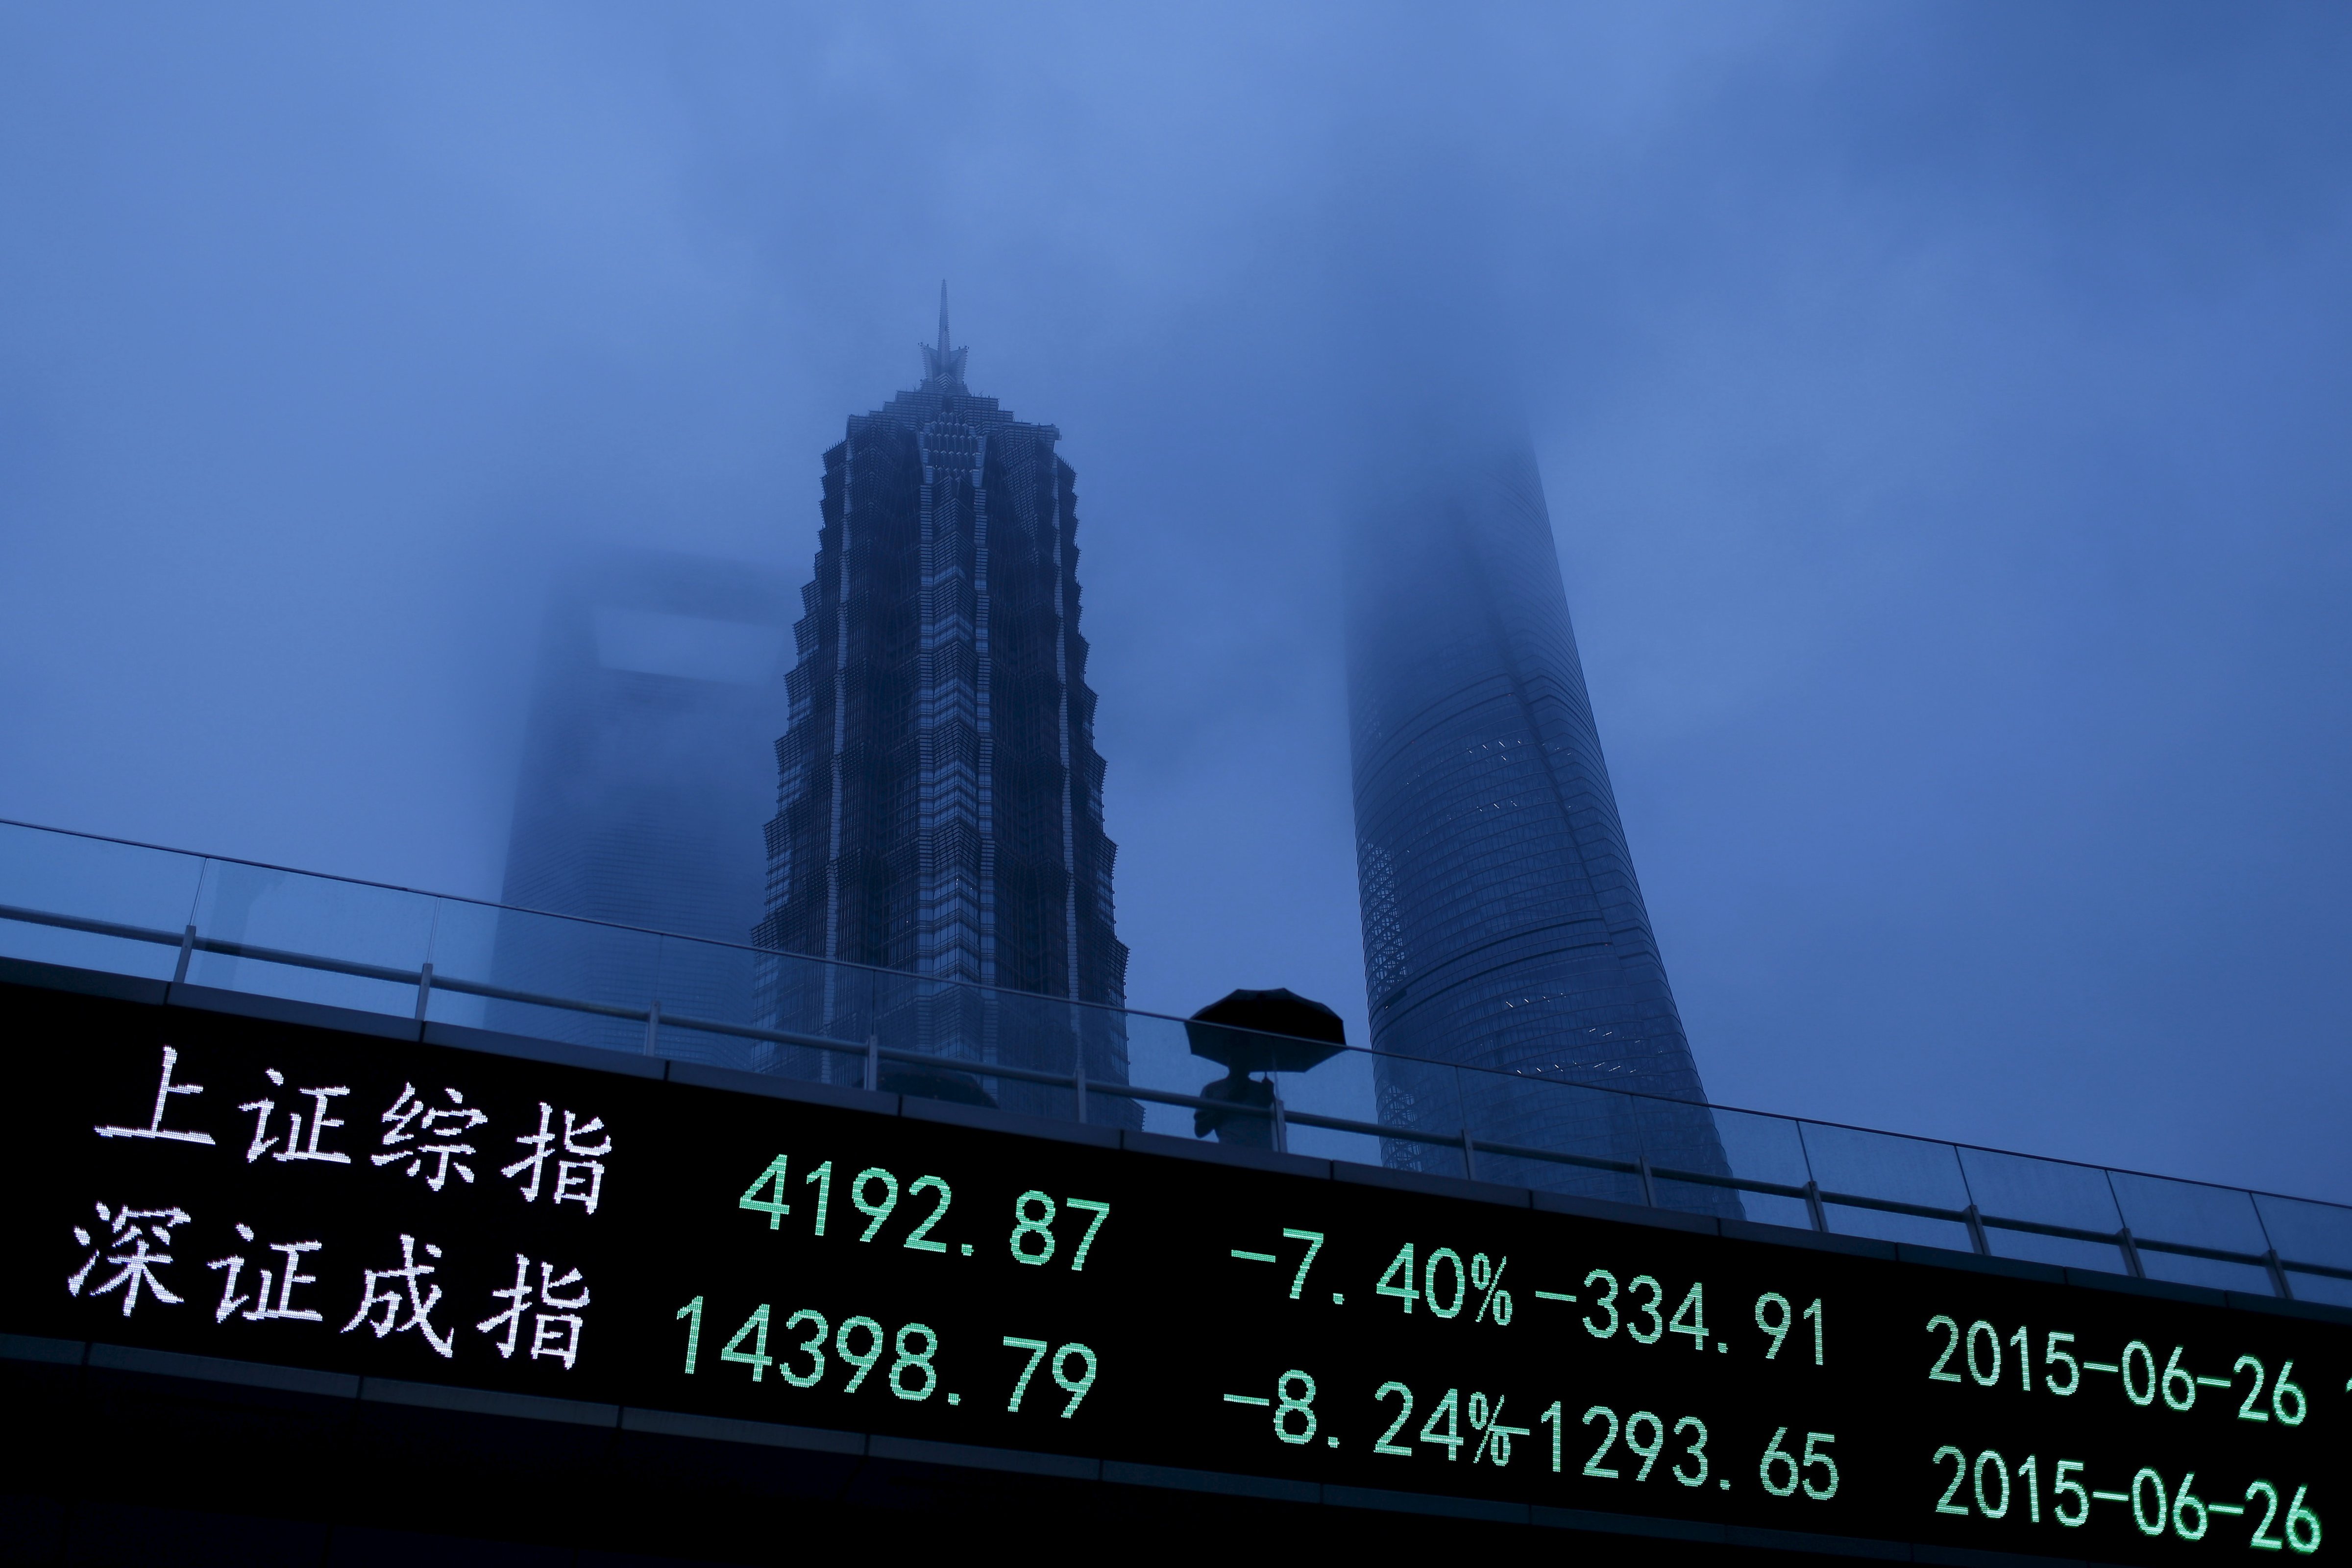 A man walks past an electronic board showing the benchmark Shanghai and Shenzhen stock indices, on a pedestrian overpass at the Pudong financial district in Shanghai, China, June 26, 2015. (Aly Song—Reuters)